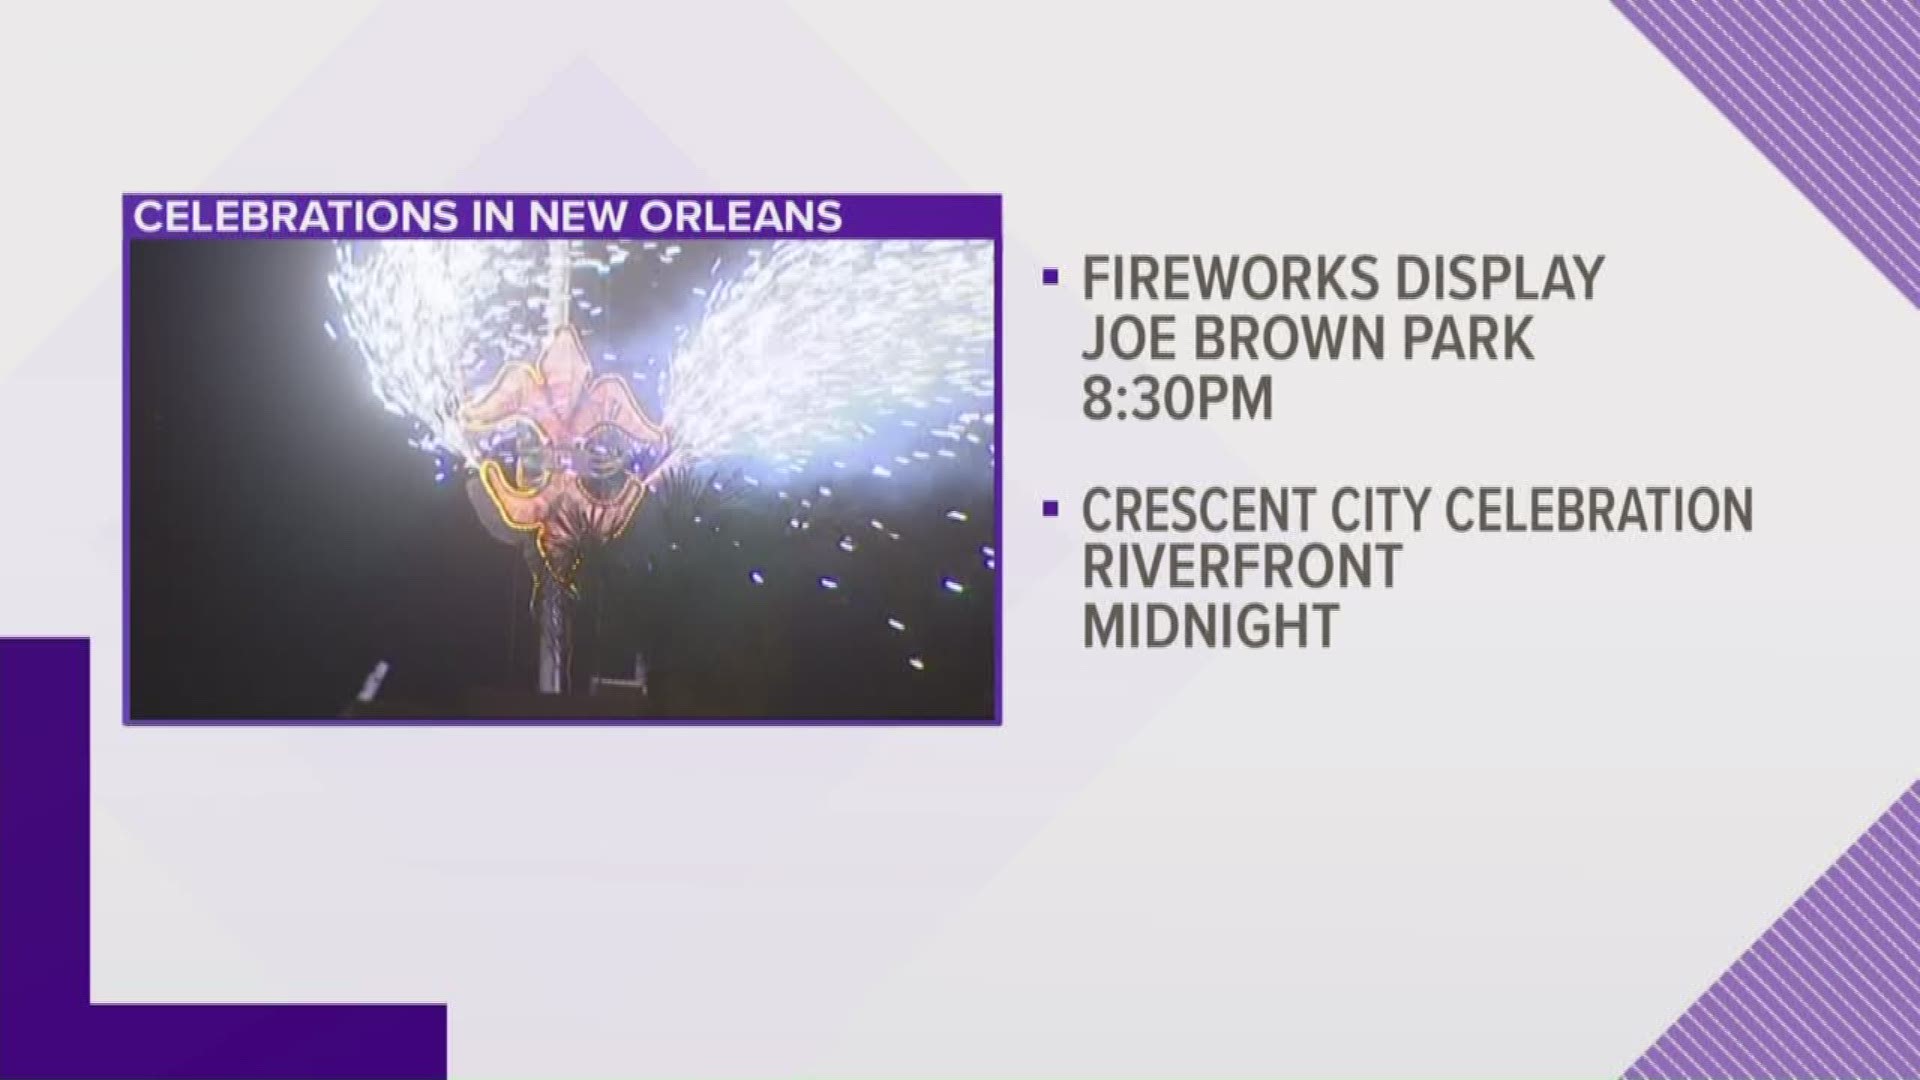 Here's what you need to know about fireworks, the Sugar Bowl and all things New Orleans for New Year's Eve and New Year's Day.